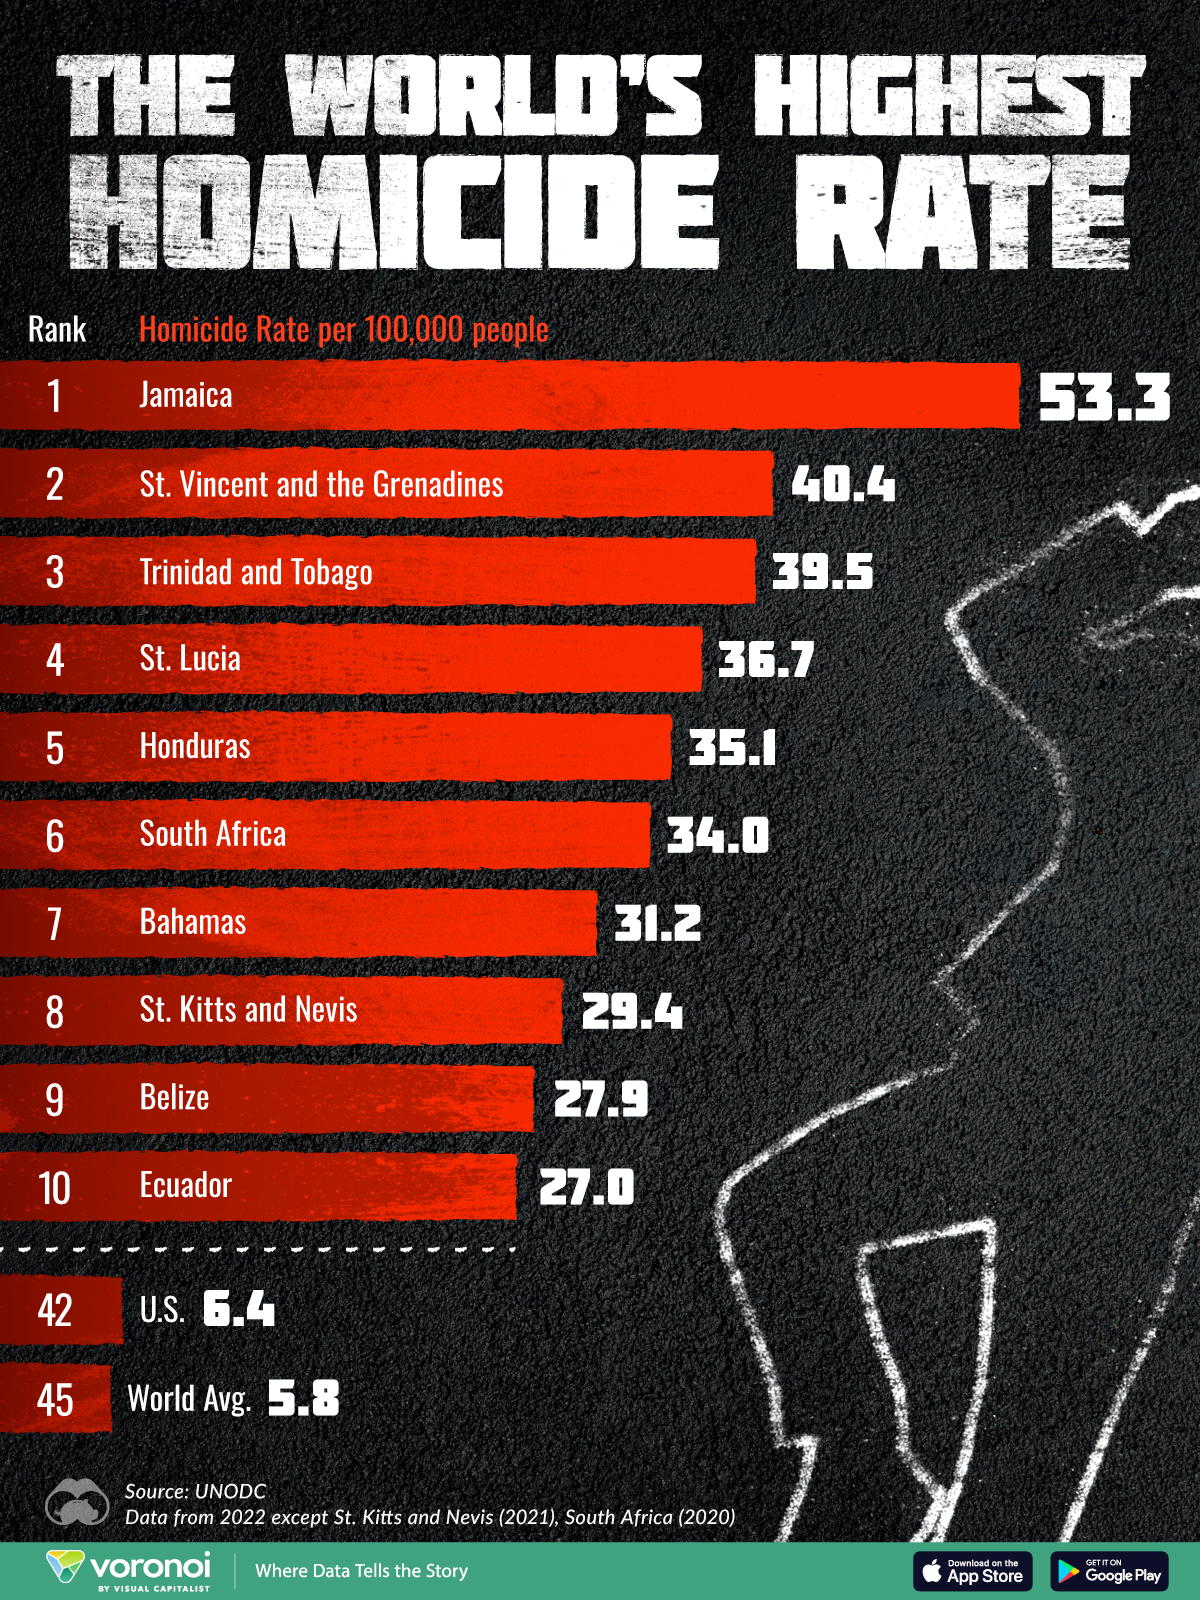 This bar chart shows the most dangerous countries in the world by homicide rates per 100,000 people.